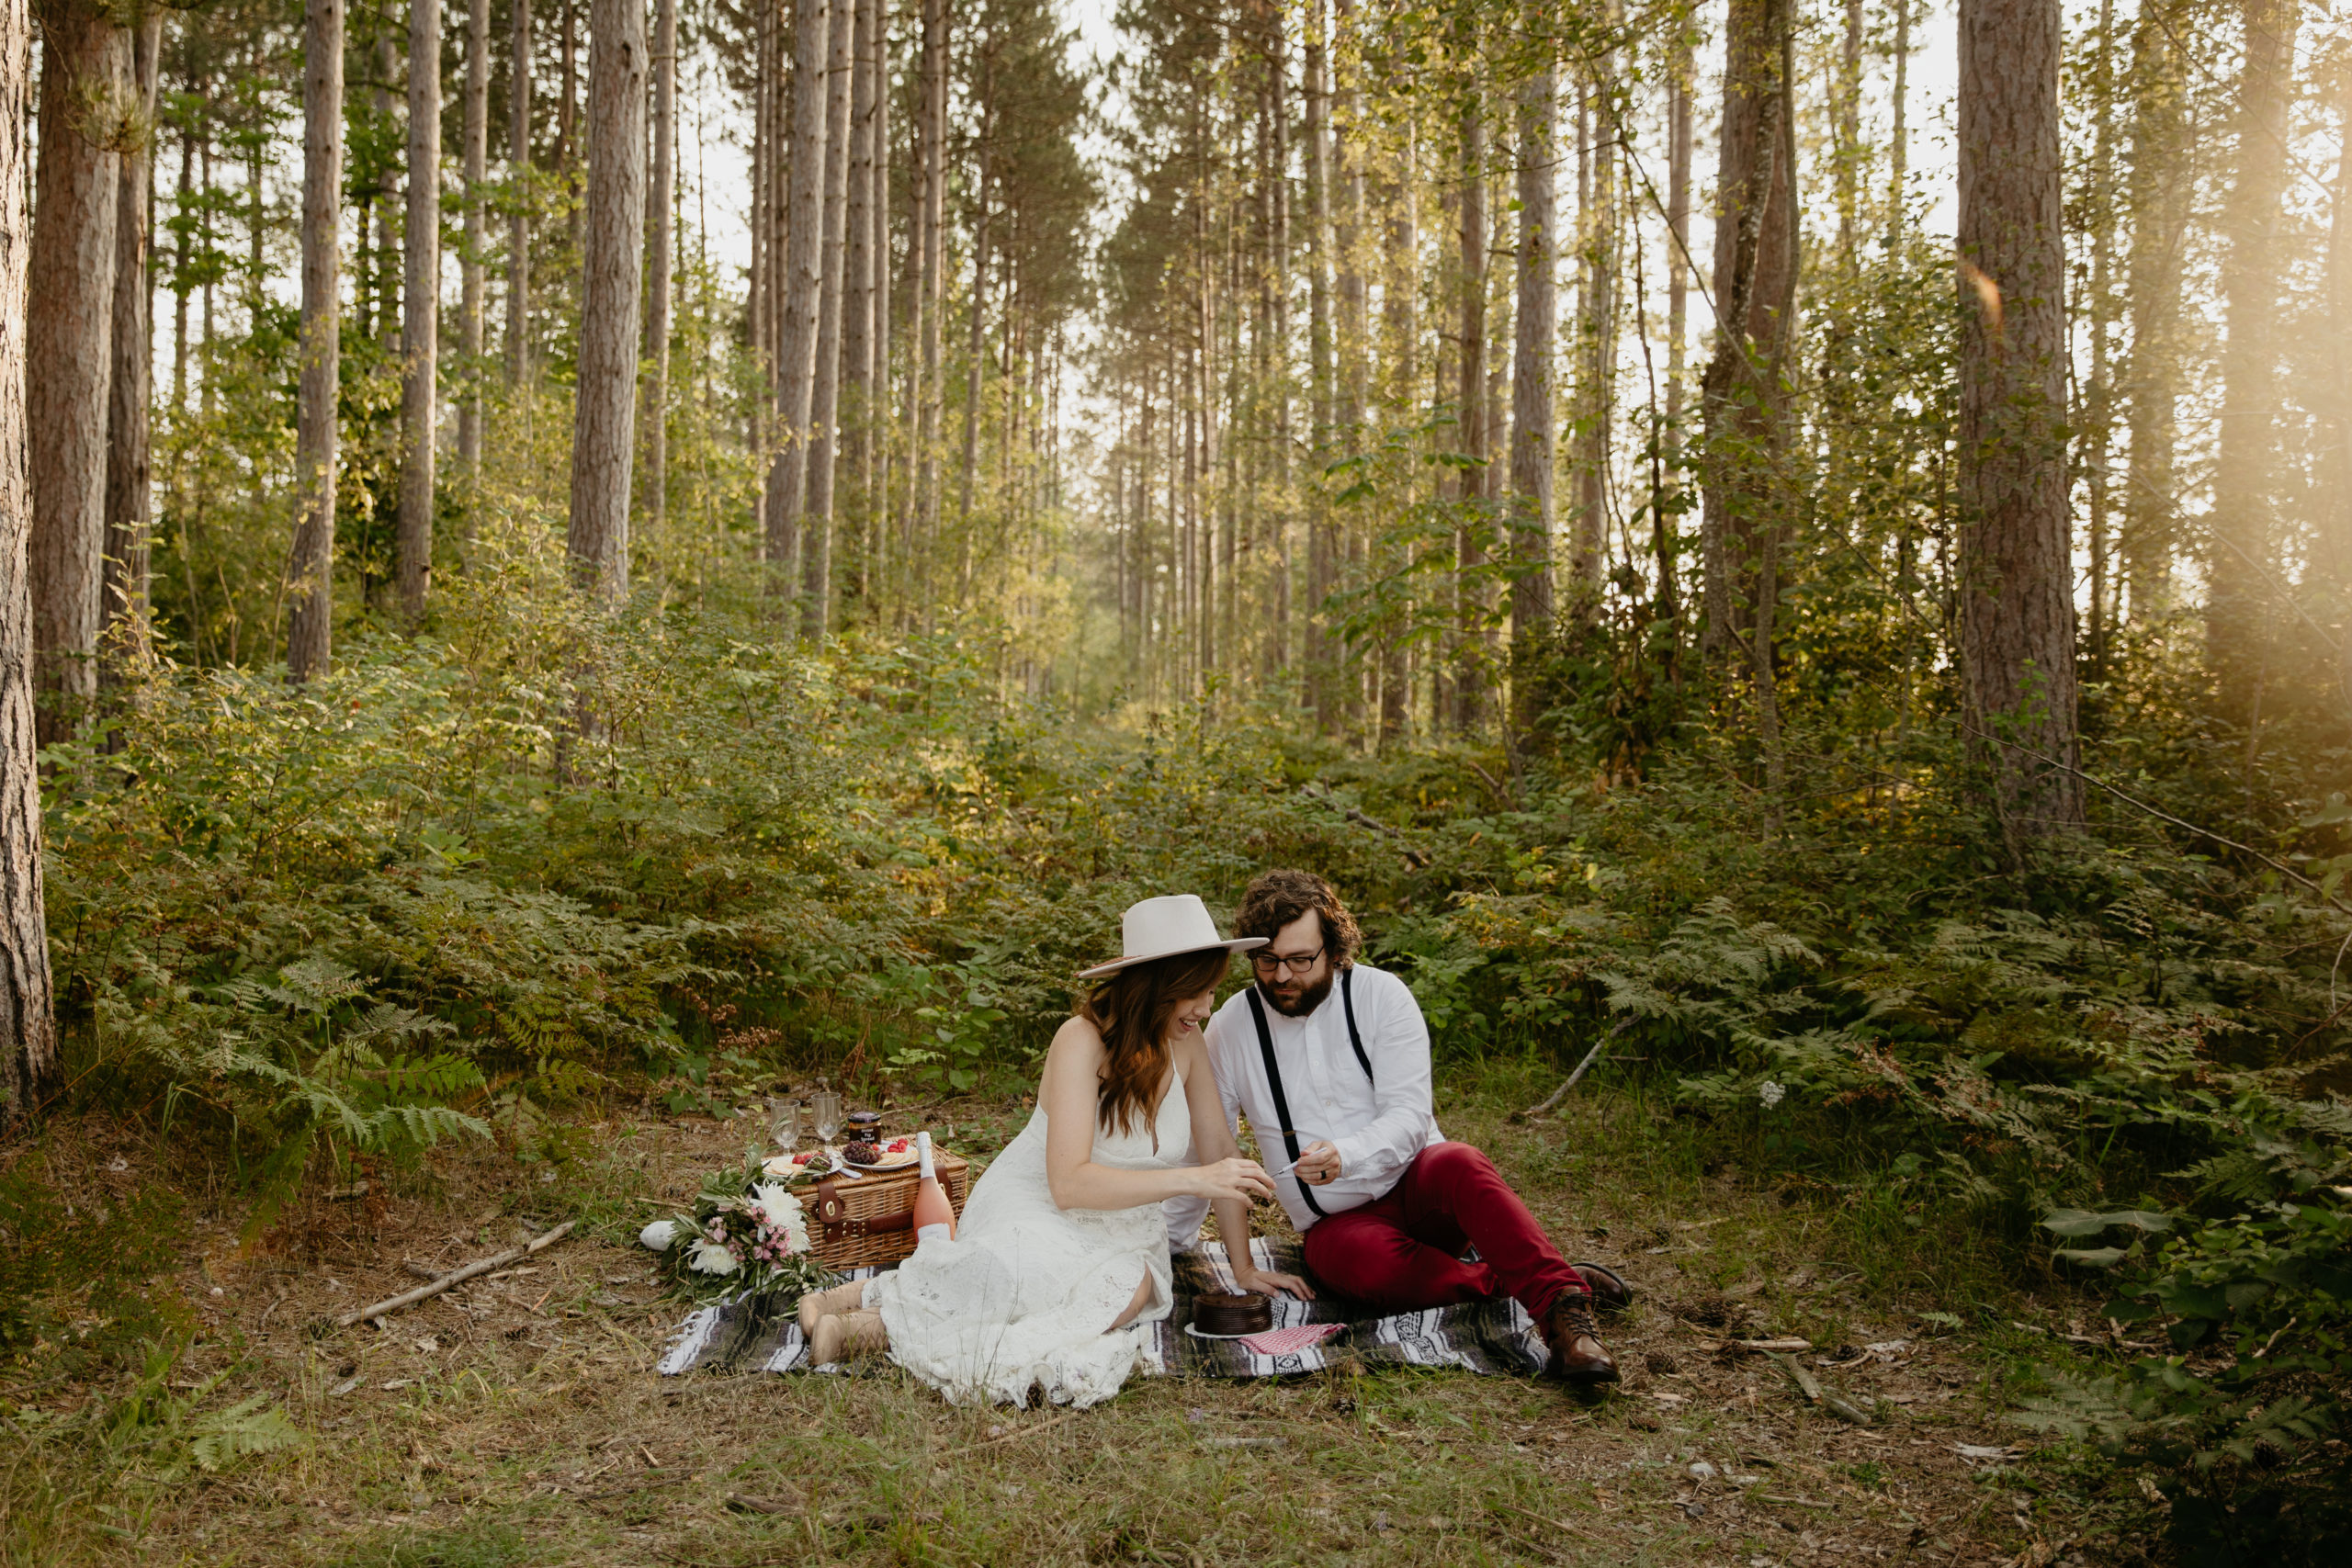 Elopement picnic in Manistee Forest // Michigan elopement in the summer